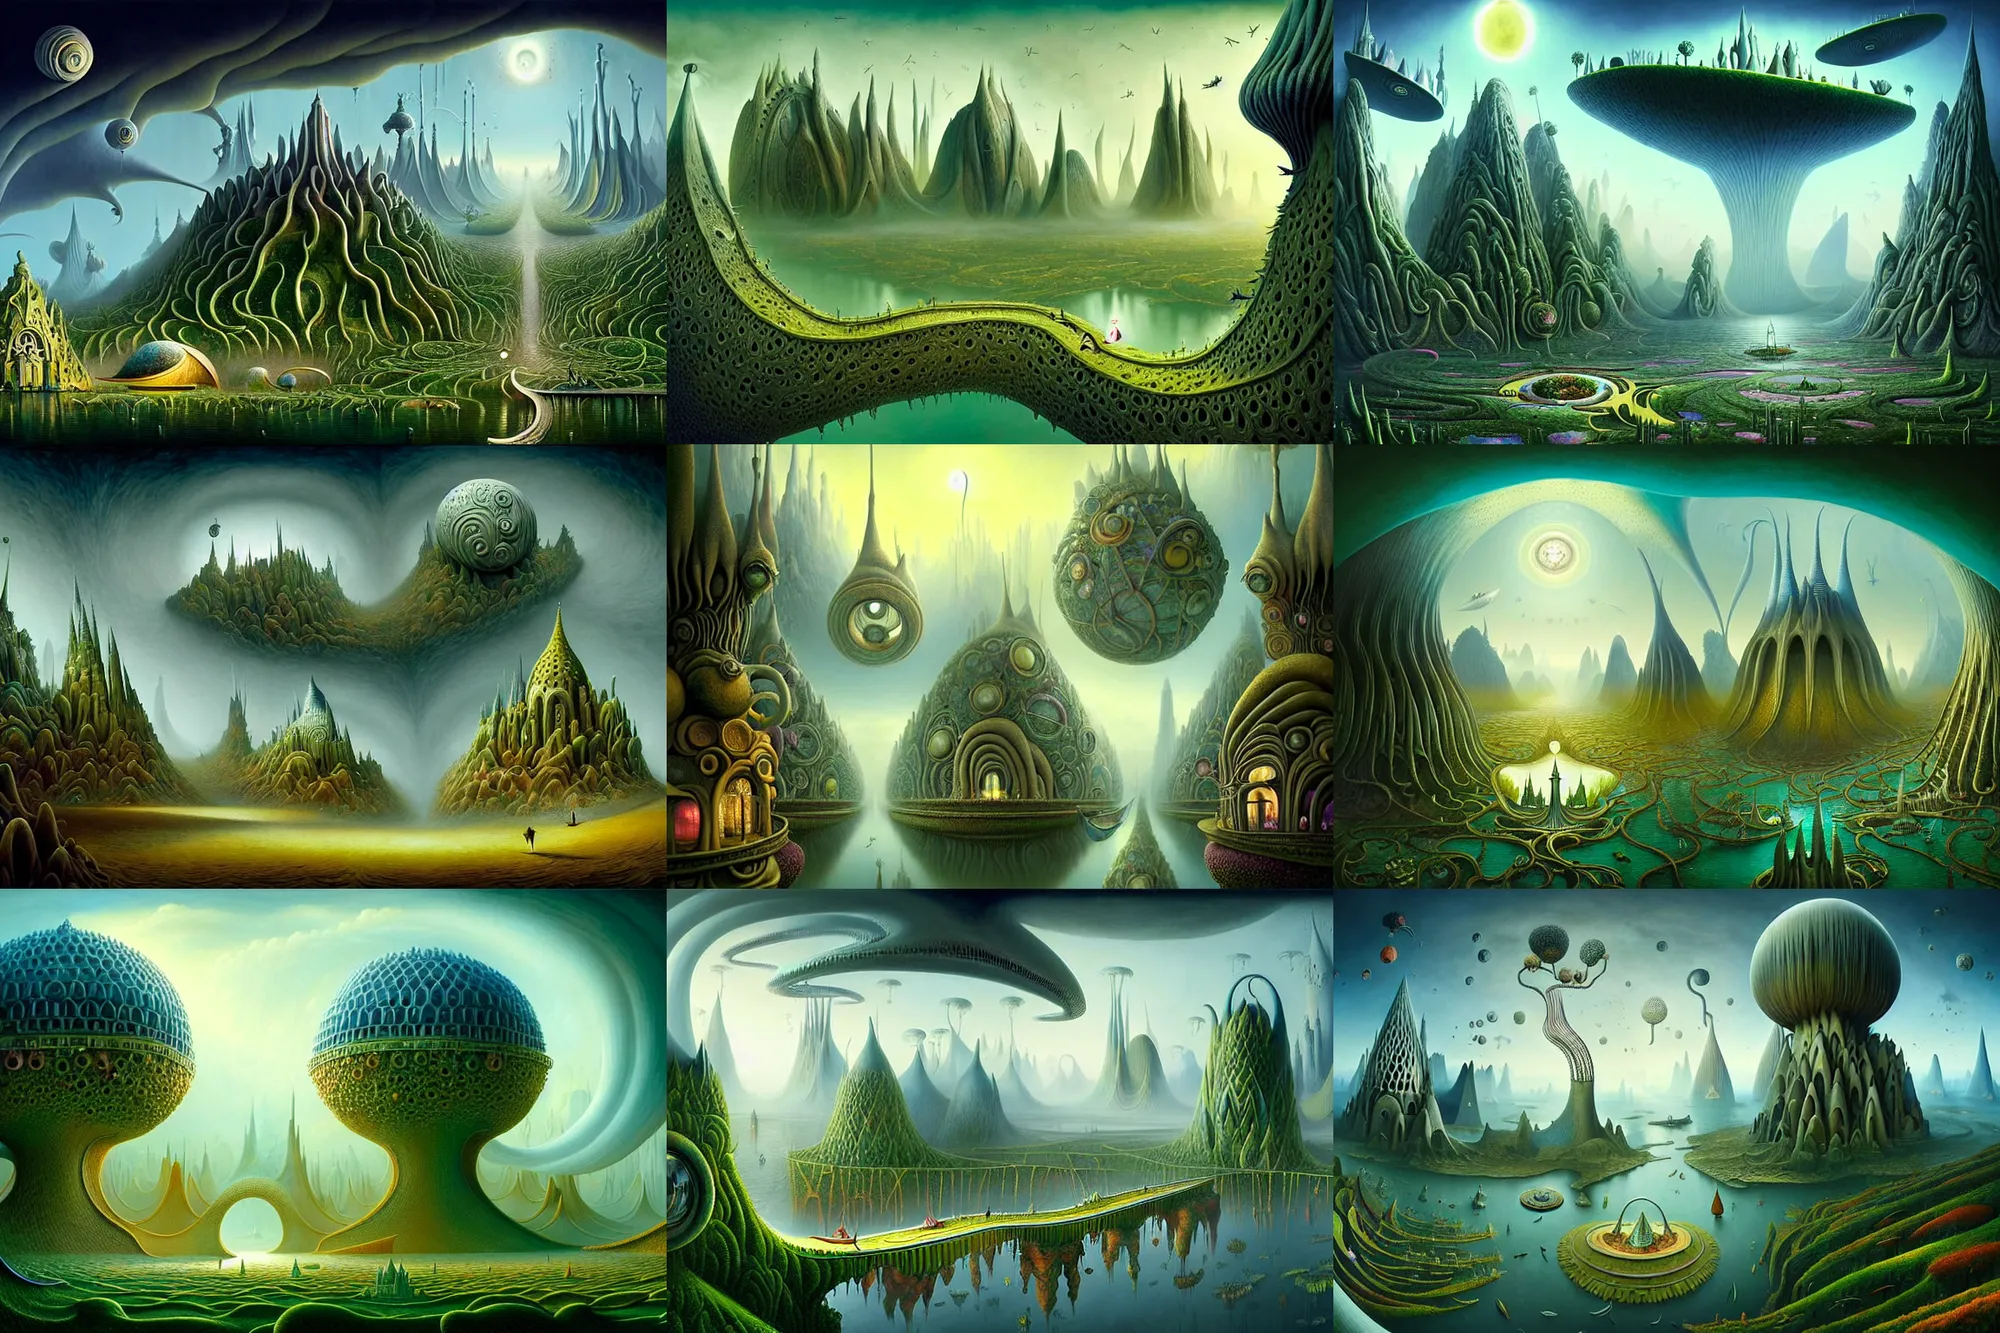 Prompt: a beguiling and insanely detailed matte painting of alien dream worlds with surreal architecture designed by Heironymous Bosch, mega structures inspired by Heironymous Bosch's Garden of Earthly Delights, vast surreal landscape and horizon by Cyril Rolando and Andrew Ferez and Tyler Edlin, masterpiece!!, grand!, imaginative!!!, whimsical!!, epic scale, intricate details, sense of awe, elite, wonder, insanely complex, masterful composition, sharp focus, fantasy realism, dramatic lighting, hyperrealistic